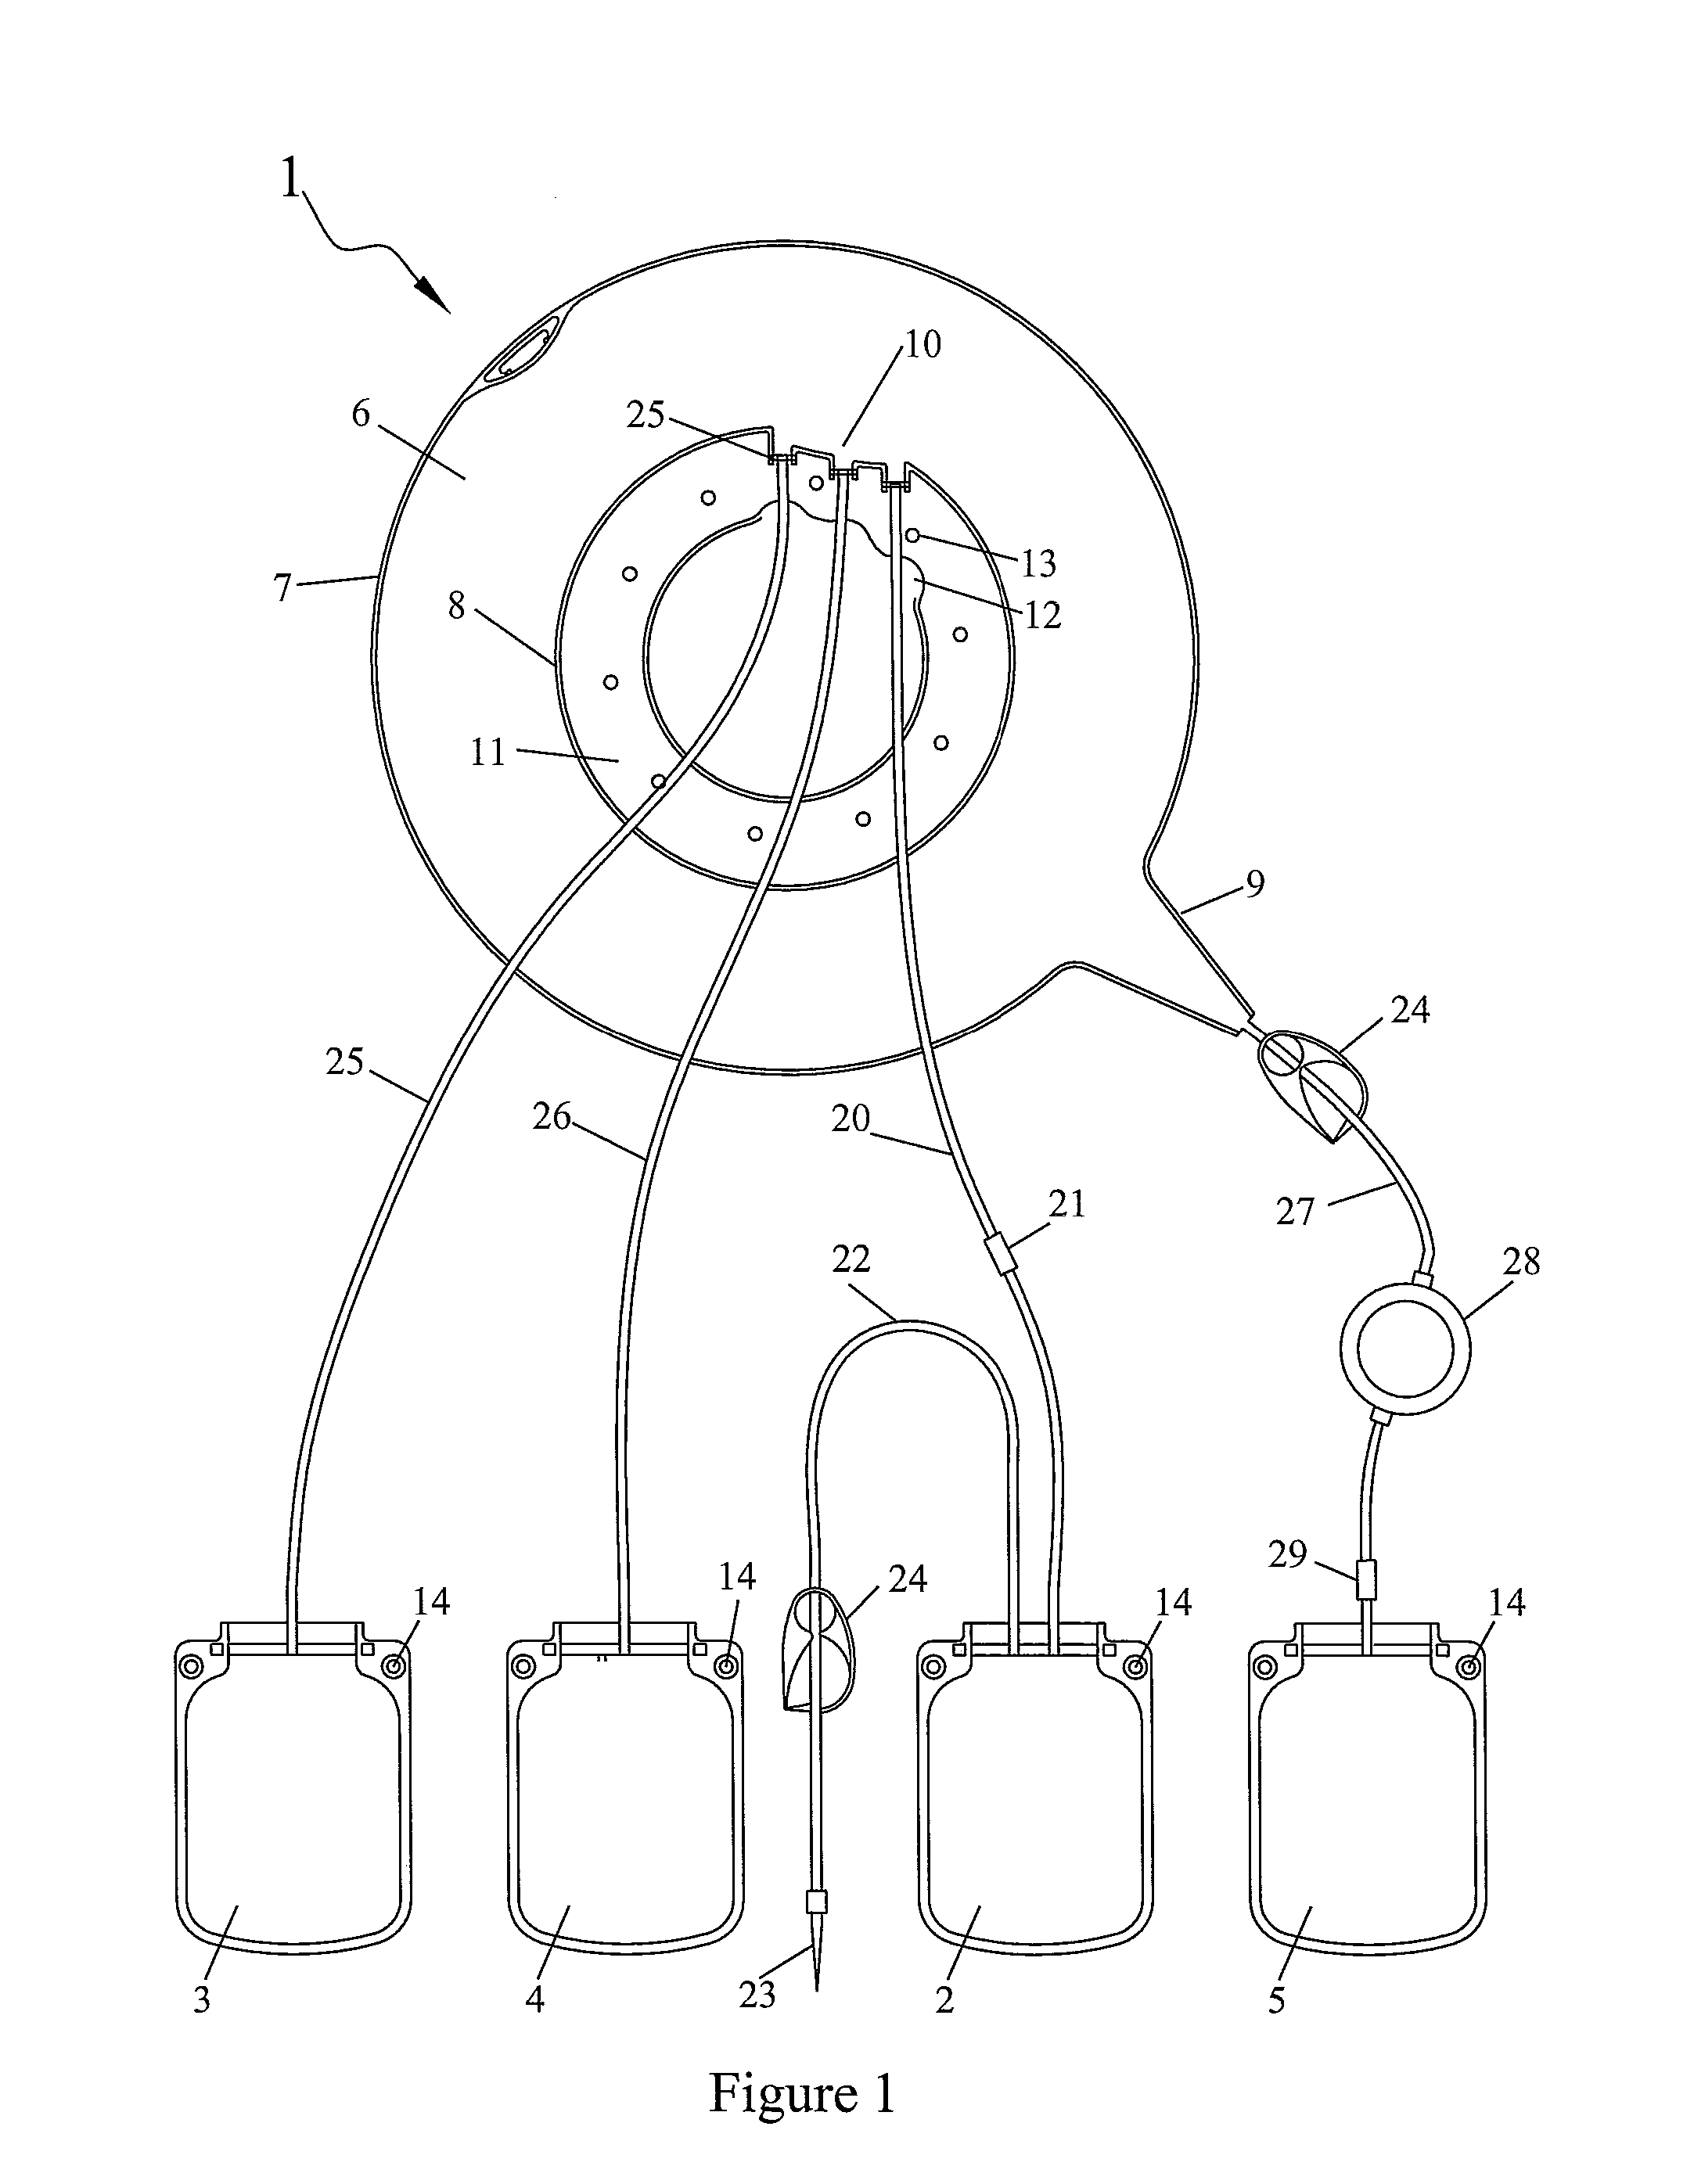 Method for Optimizing Spin Time In a Centrifuge Apparatus for Biologic Fluid